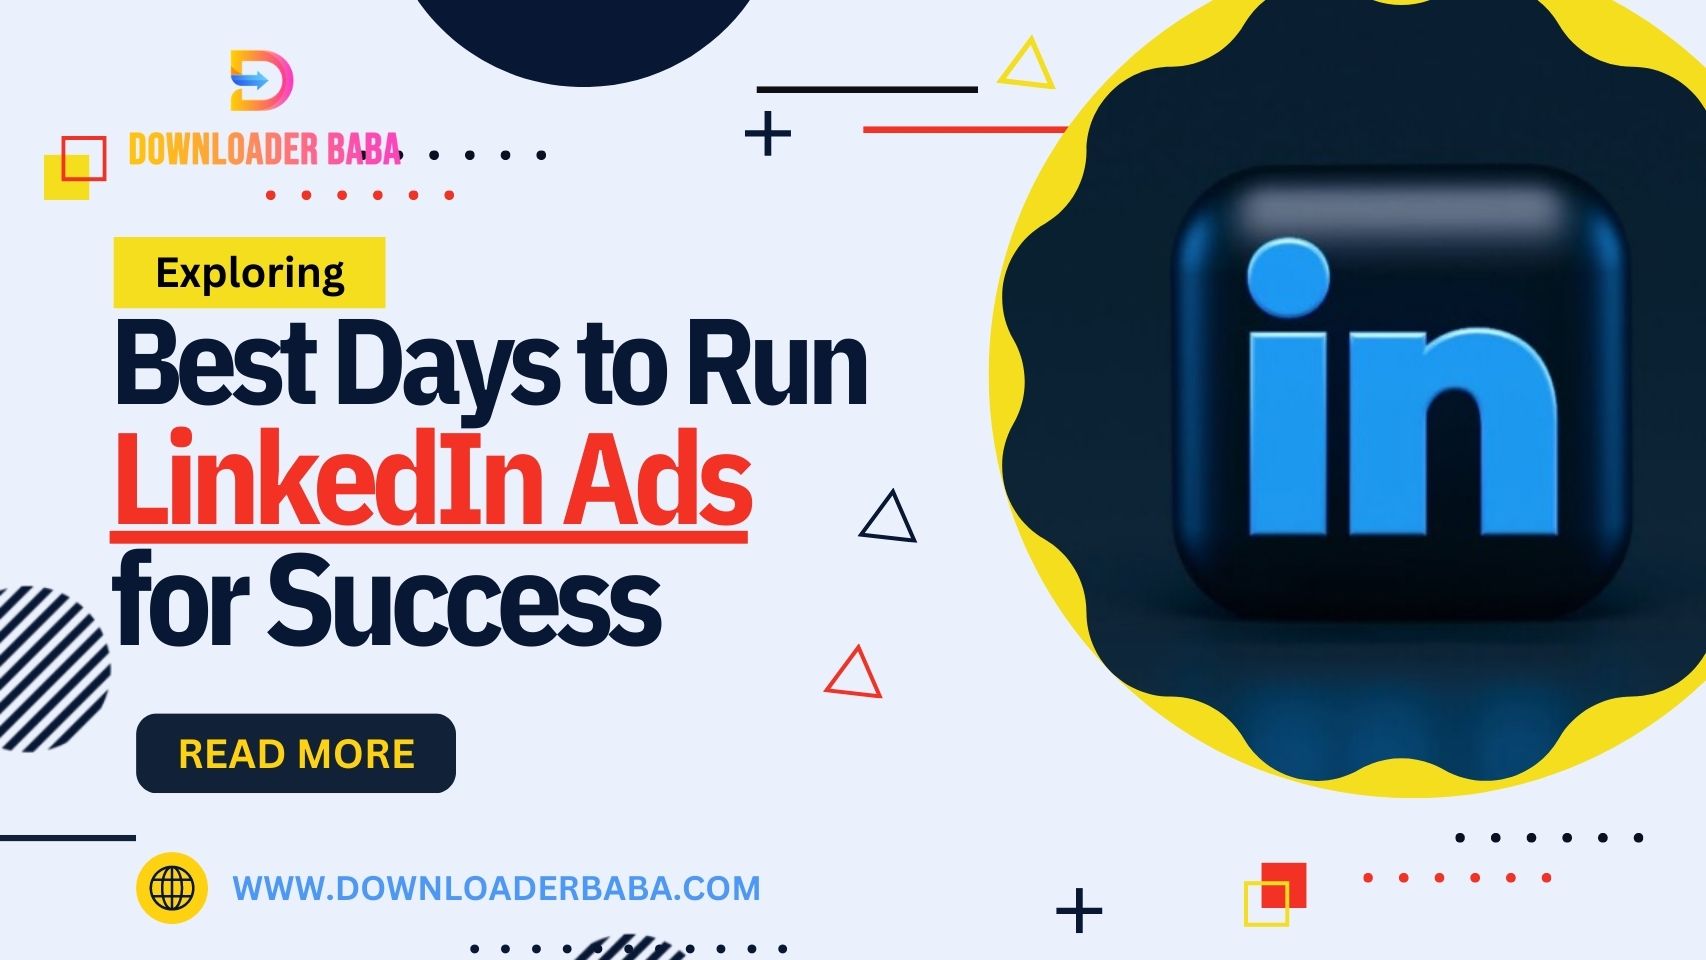 An image of Best Days to Run LinkedIn Ads for Success